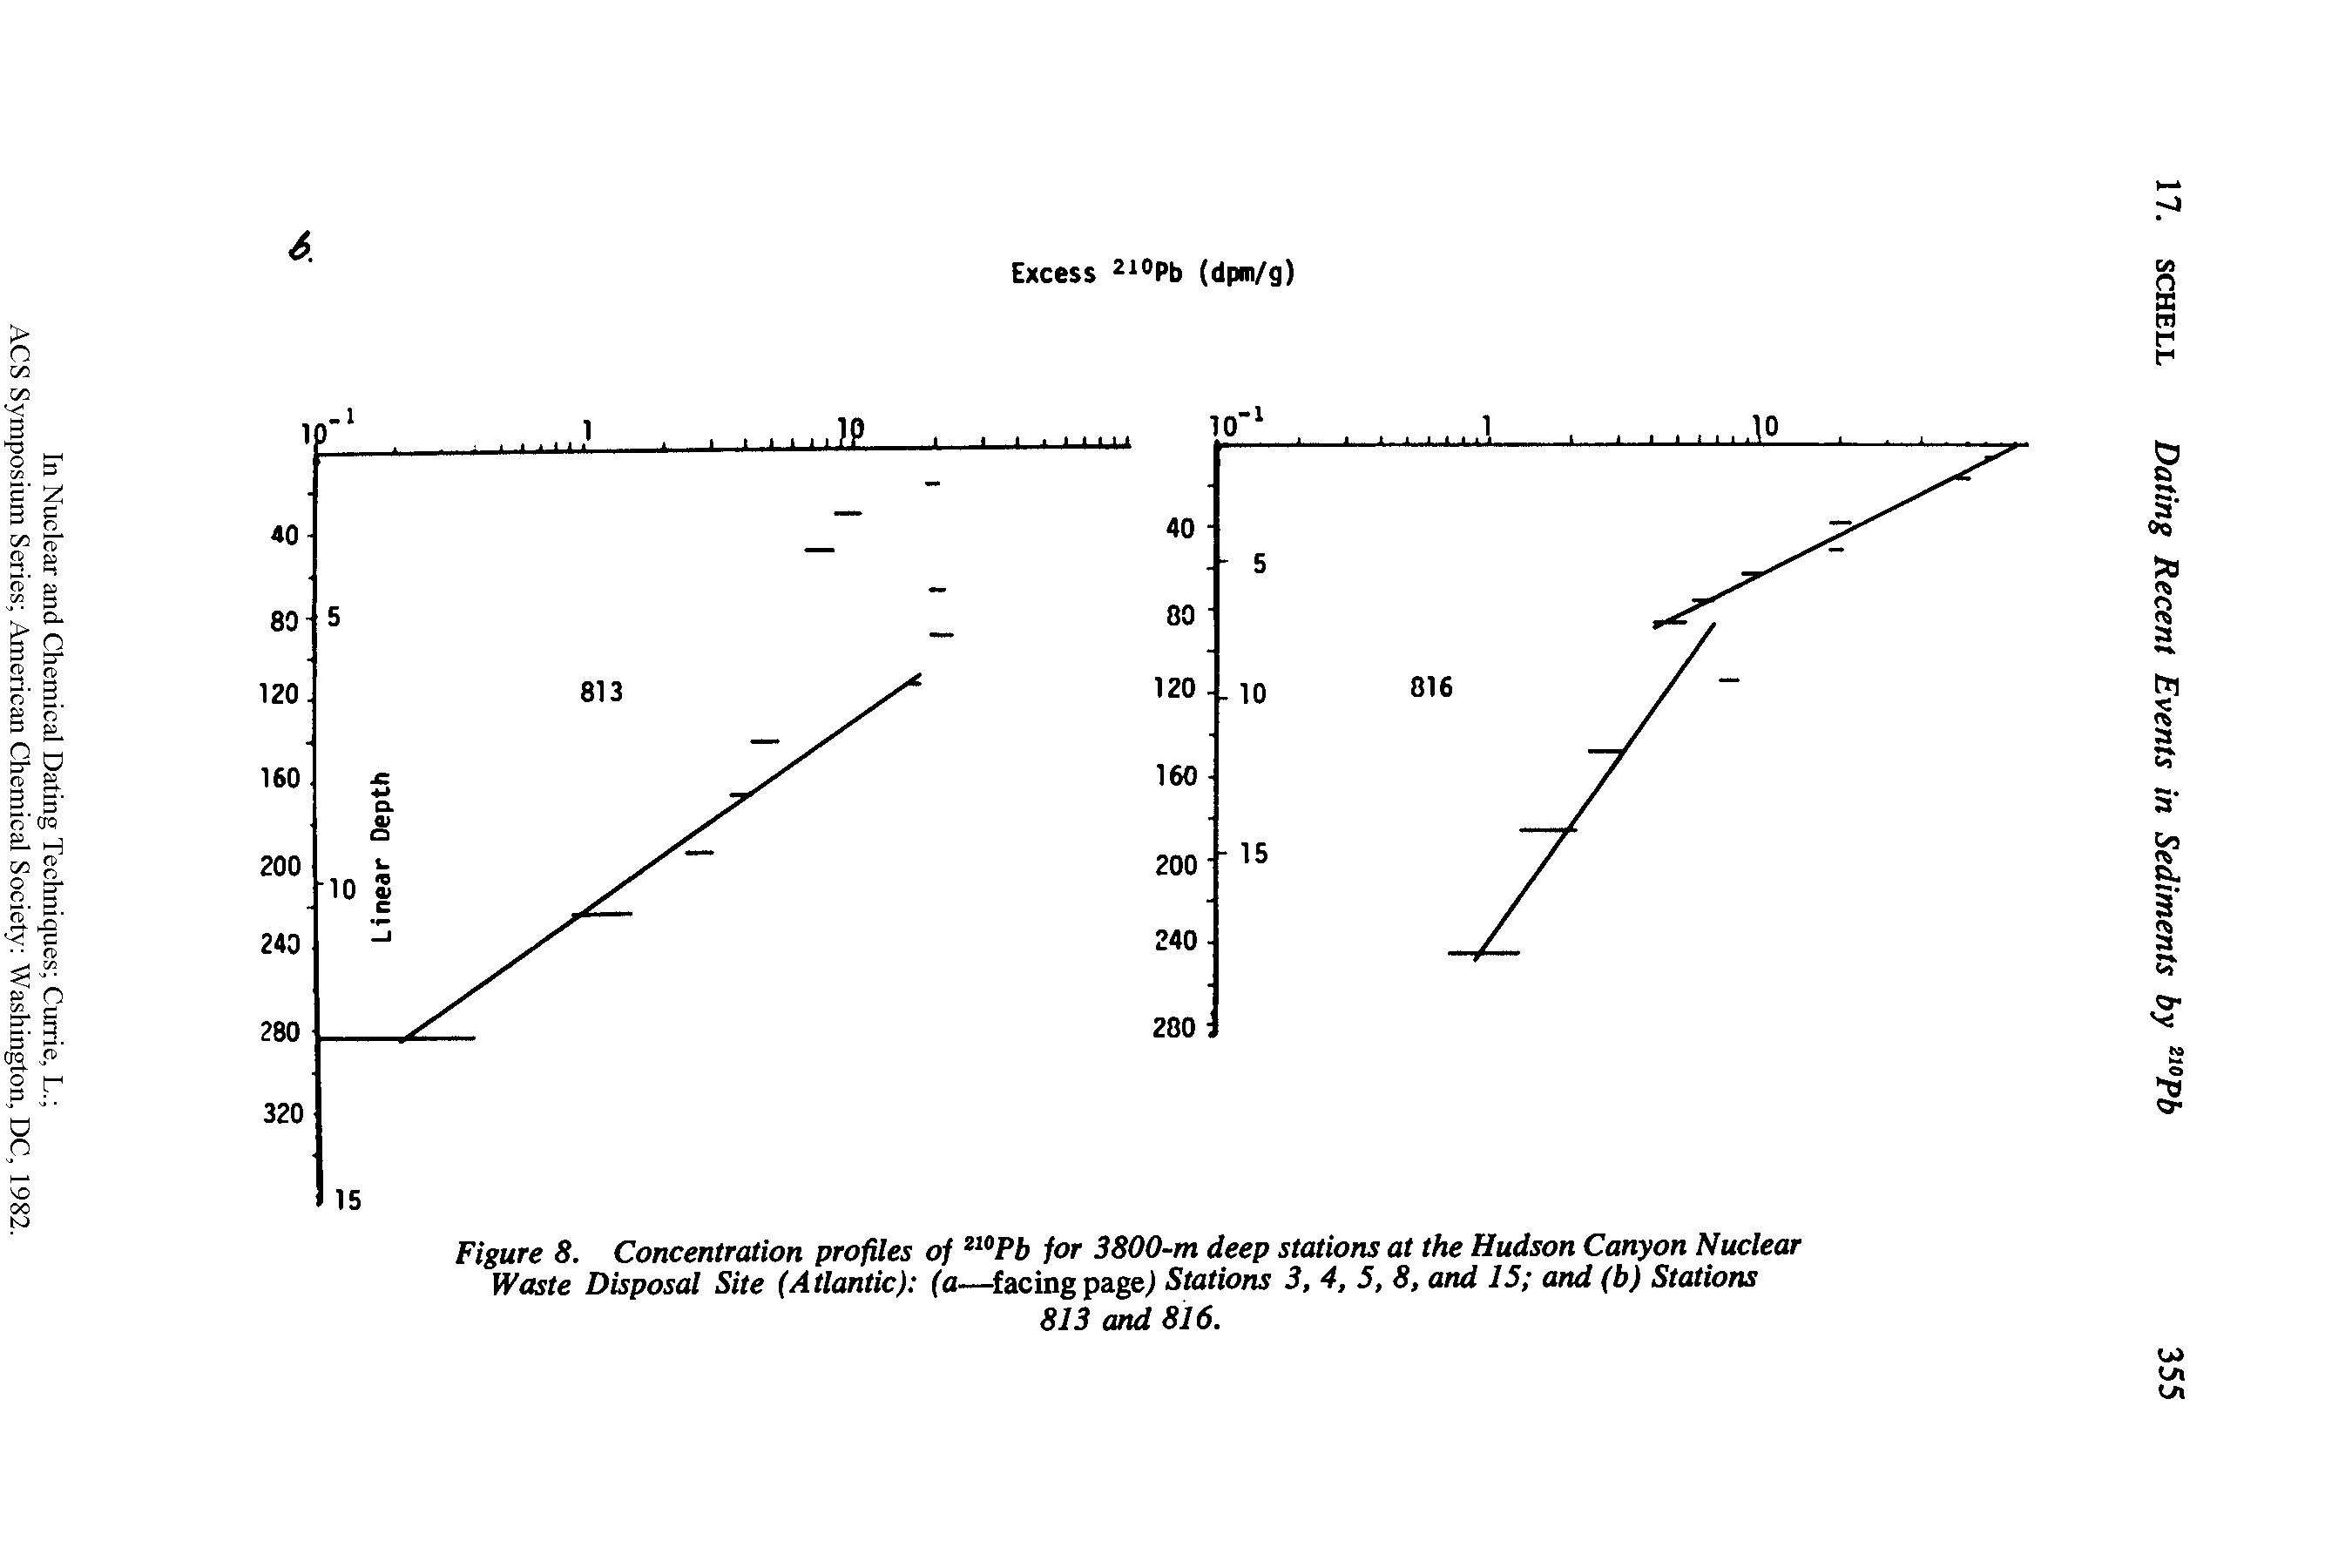 Figure 8. Concentration profiles of a0Pb for 3800-m deep stations at the Hudson Canyon Nuclear Waste Disposal Site (Atlantic) (a—facing page) Stations 3, 4, 5, 8, and 15 and (b) Stations...